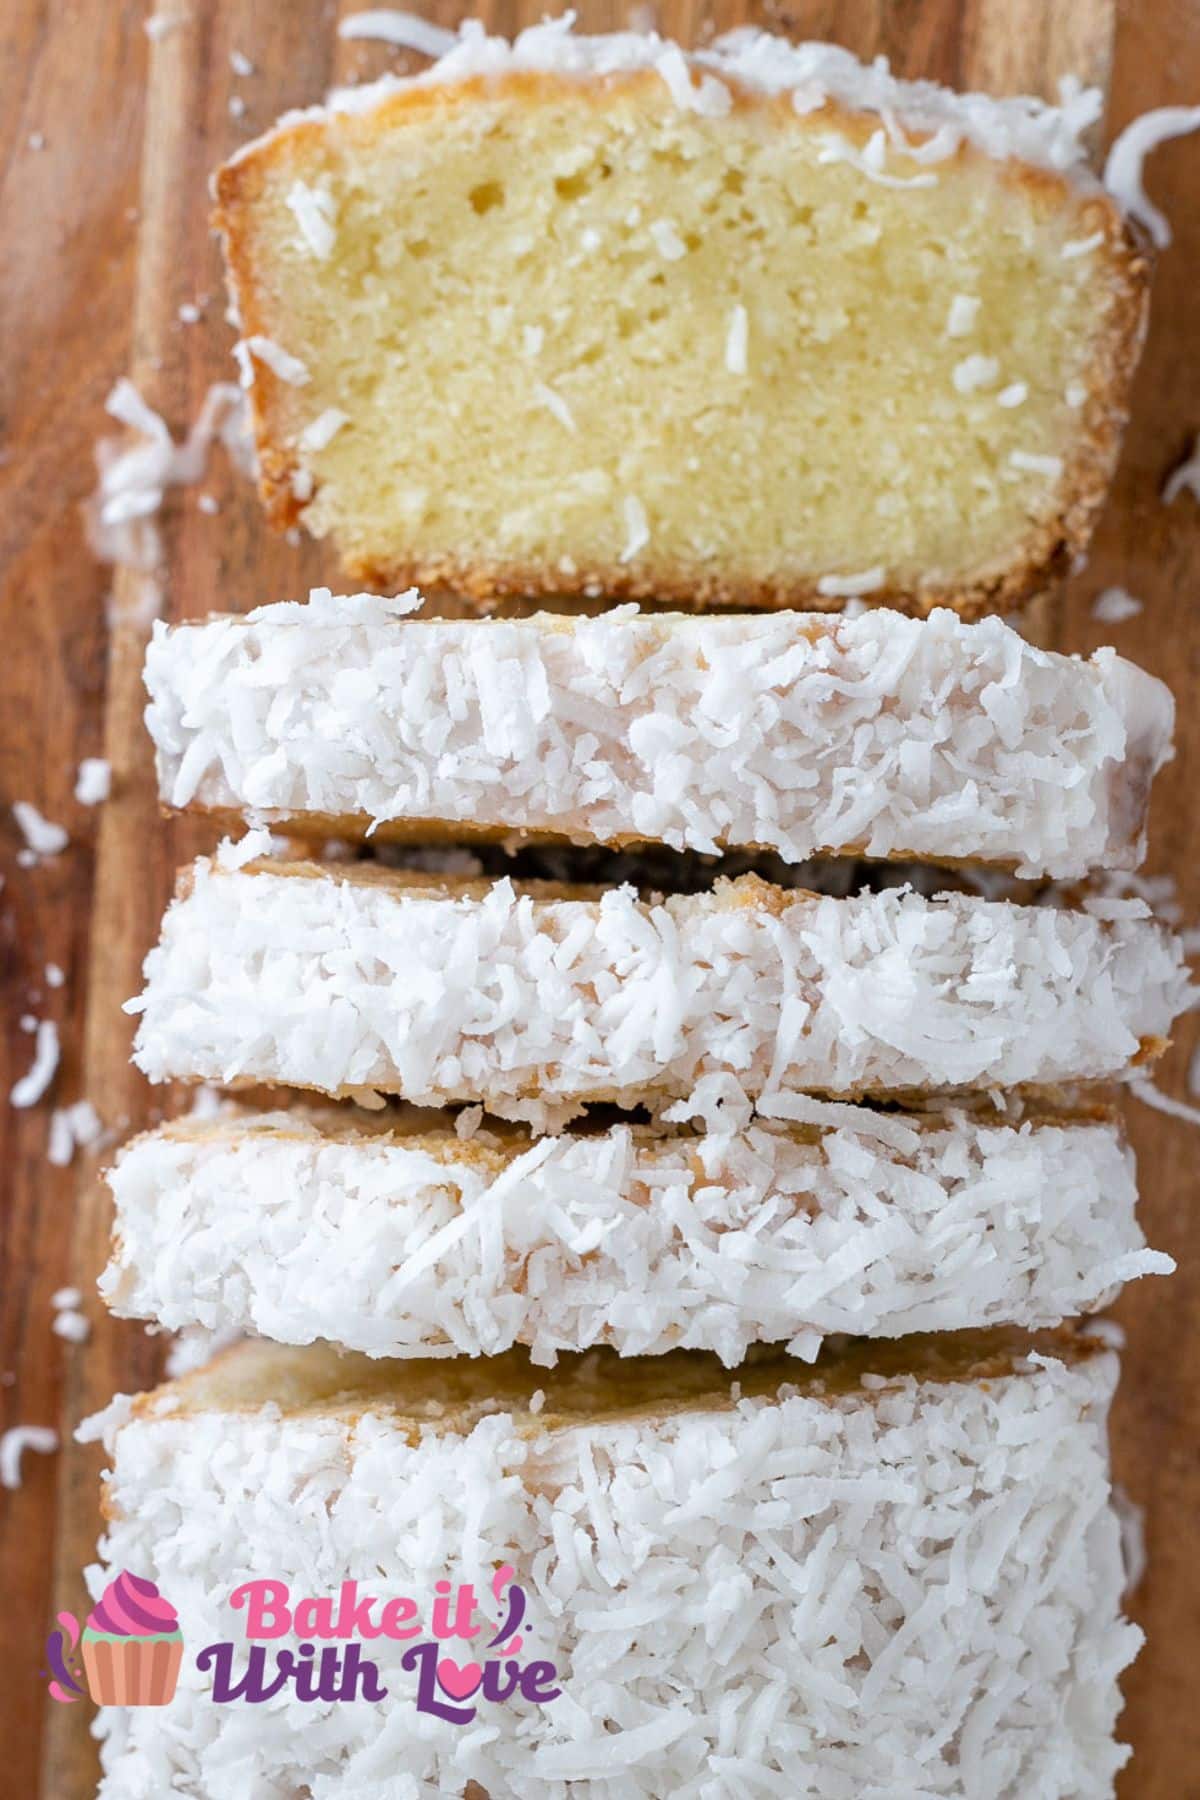 Coconut loaf cake overhead image with slices cut away and one laid down on wooden cutting board with scattered shredded sweetened coconut around the cake.